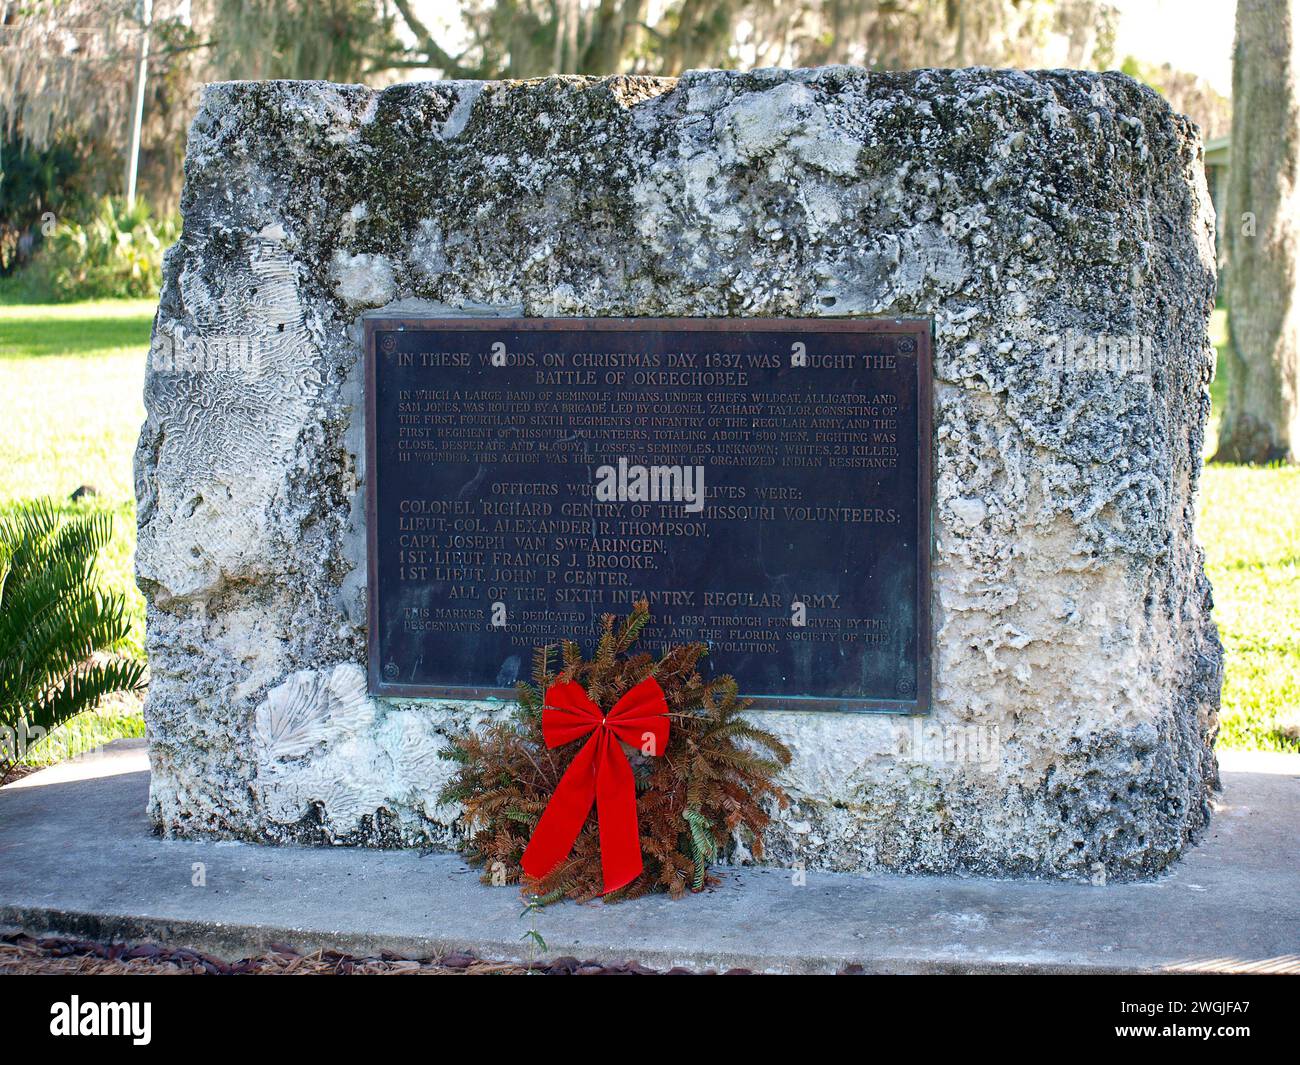 Okeechobee, Florida, United States - December 30, 2015: Marker at the site of the Battle of Okeechobee during the Second Seminole War. Stock Photo